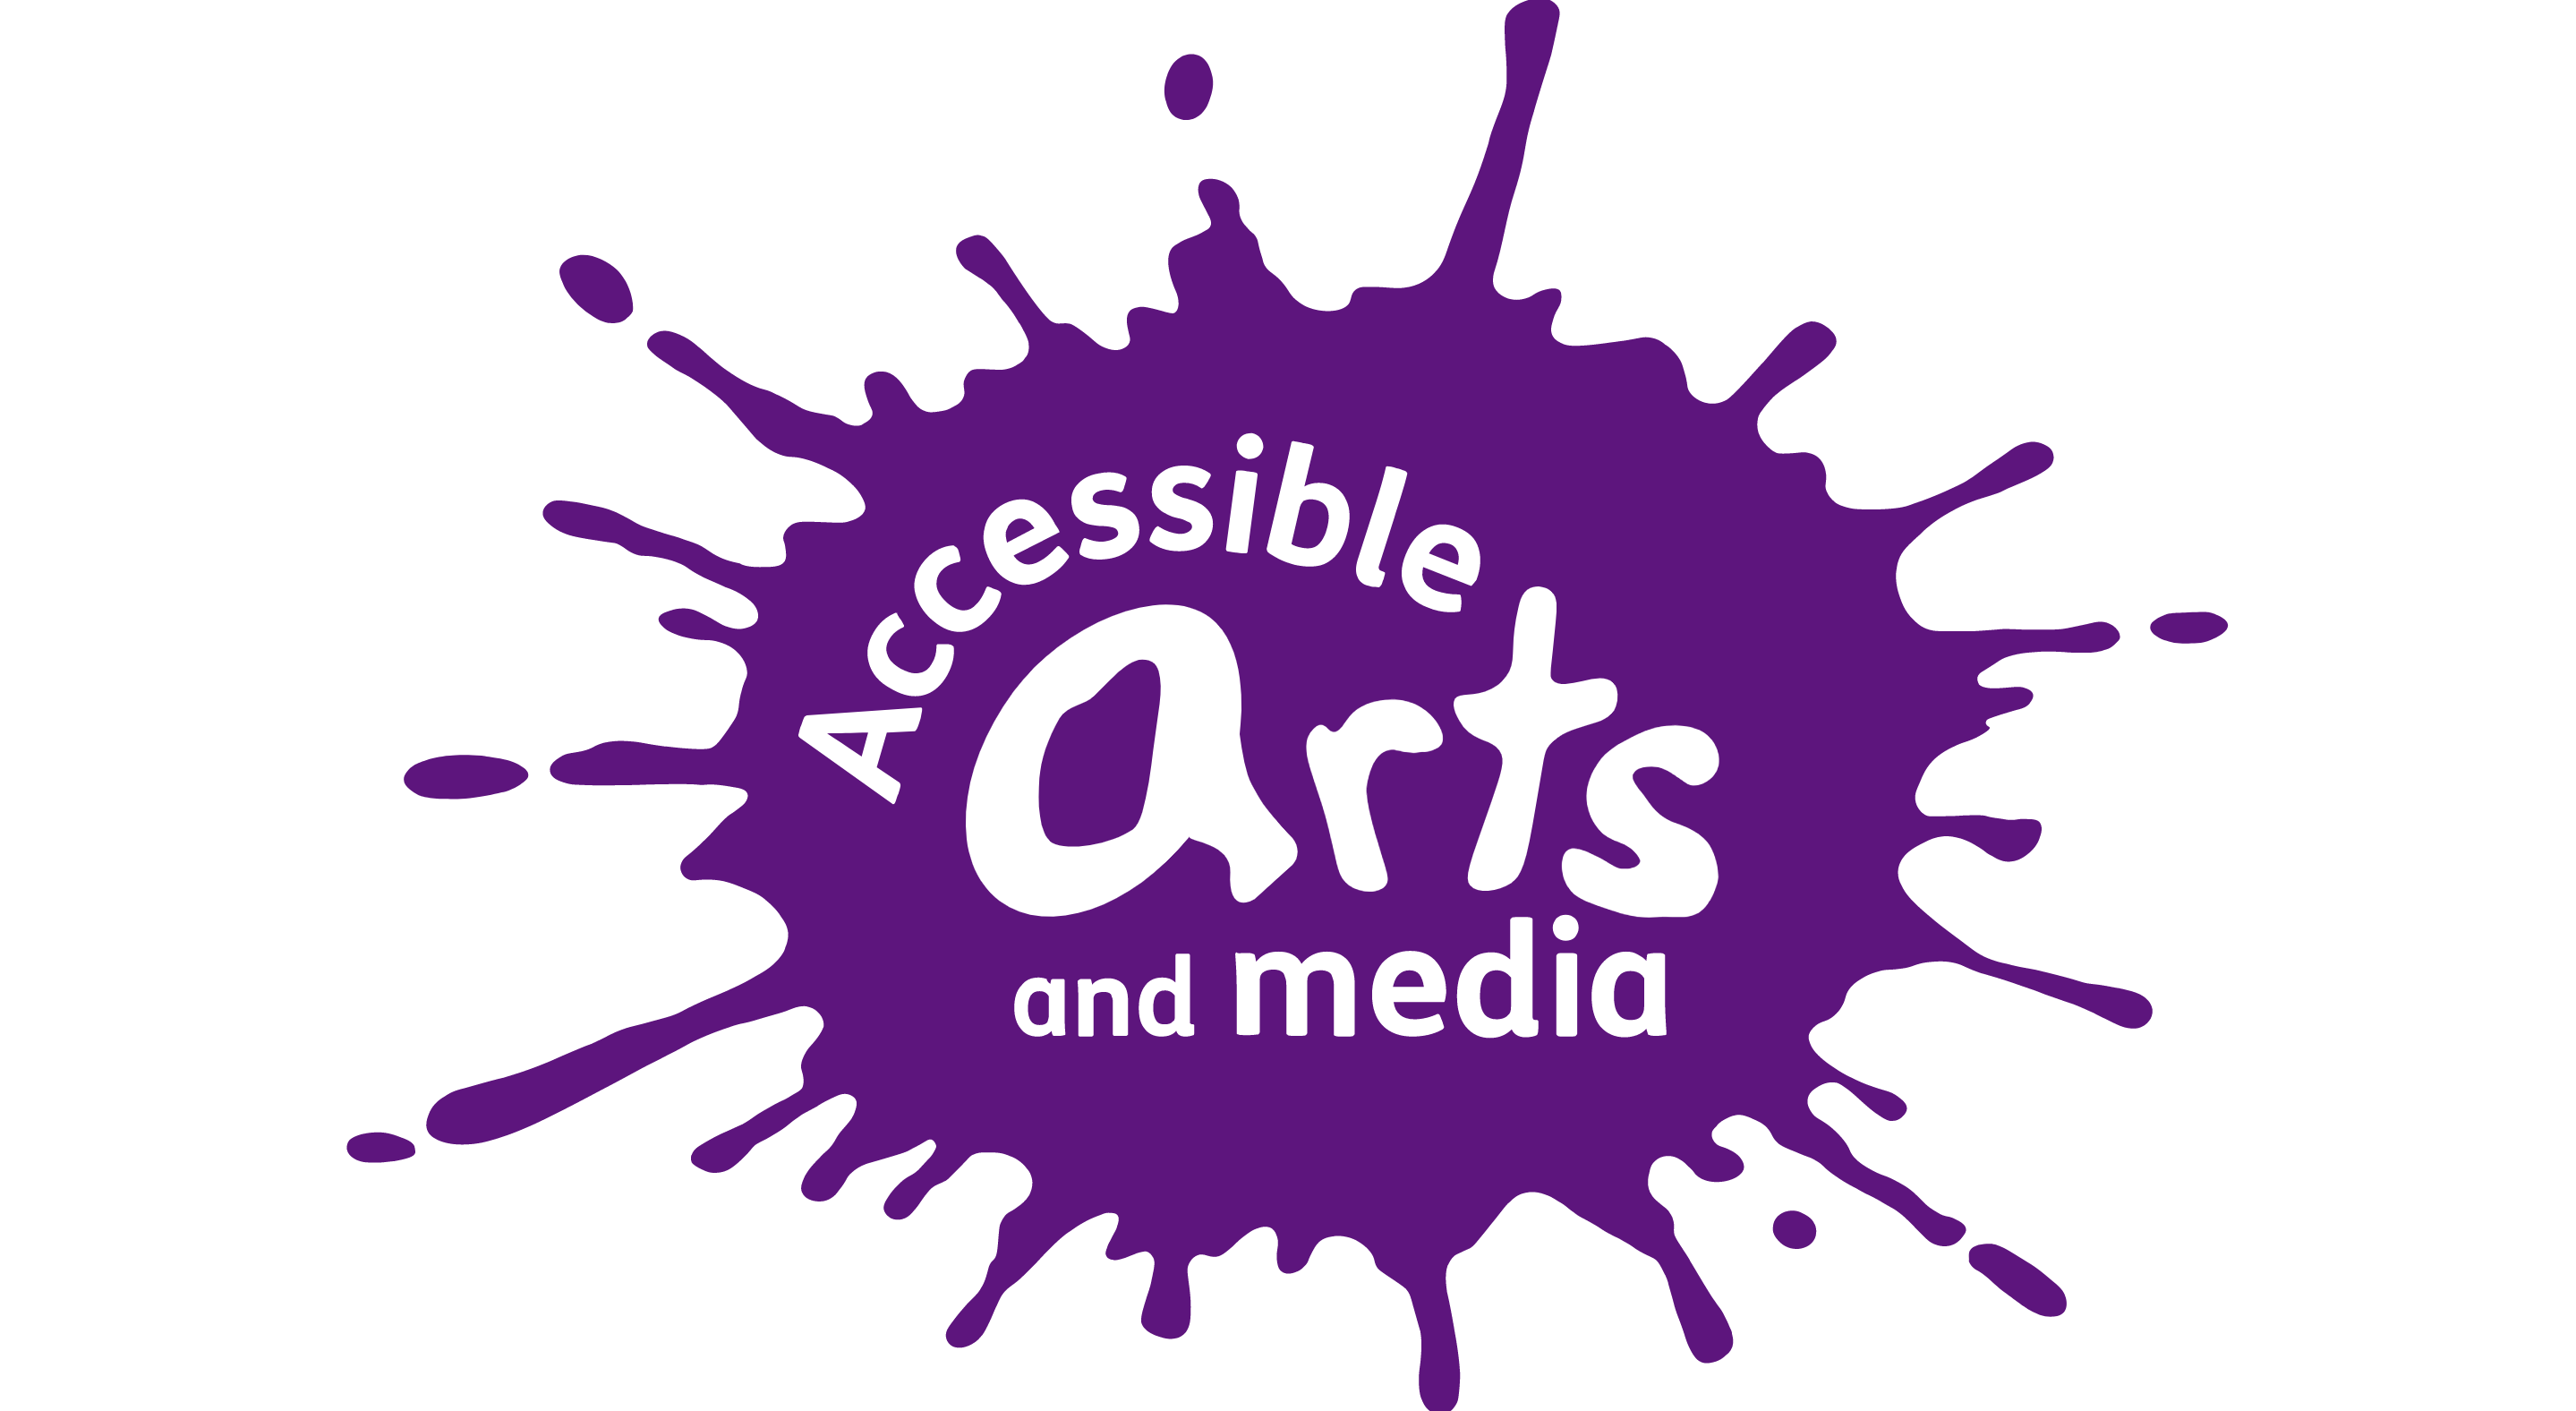 Accessible Arts and Media